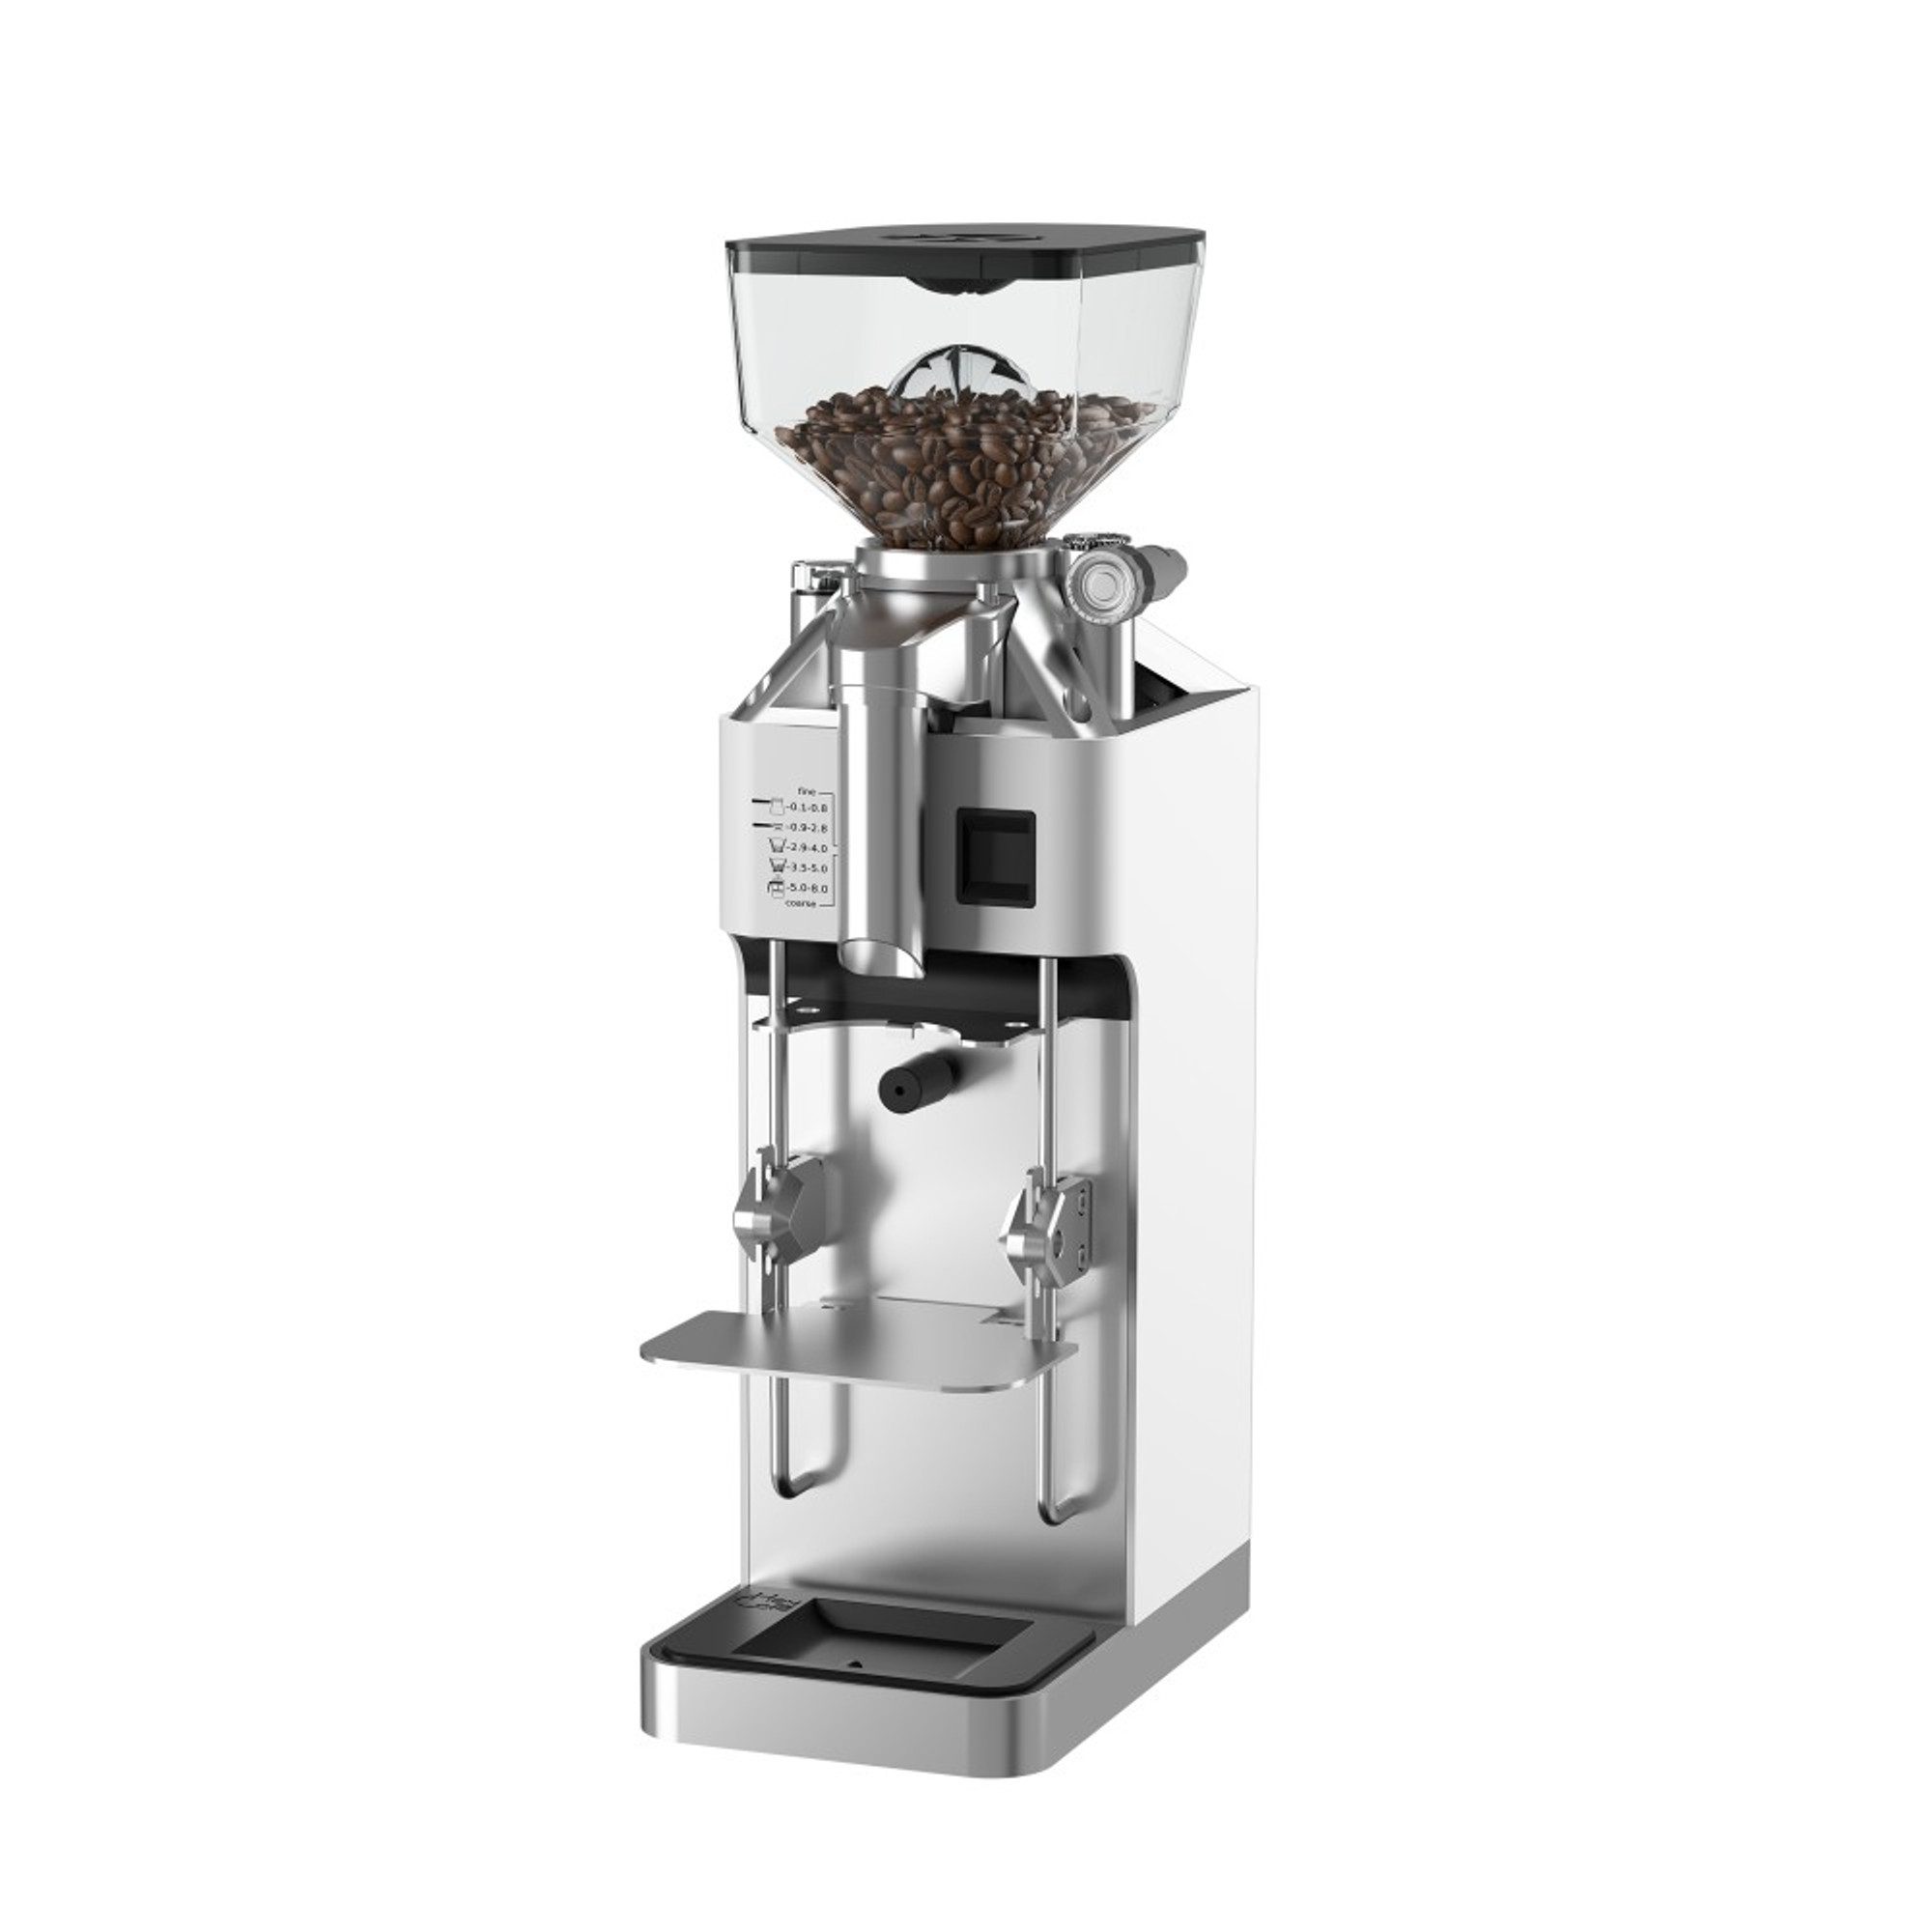 What is the grind range in microns for French Press and slightly